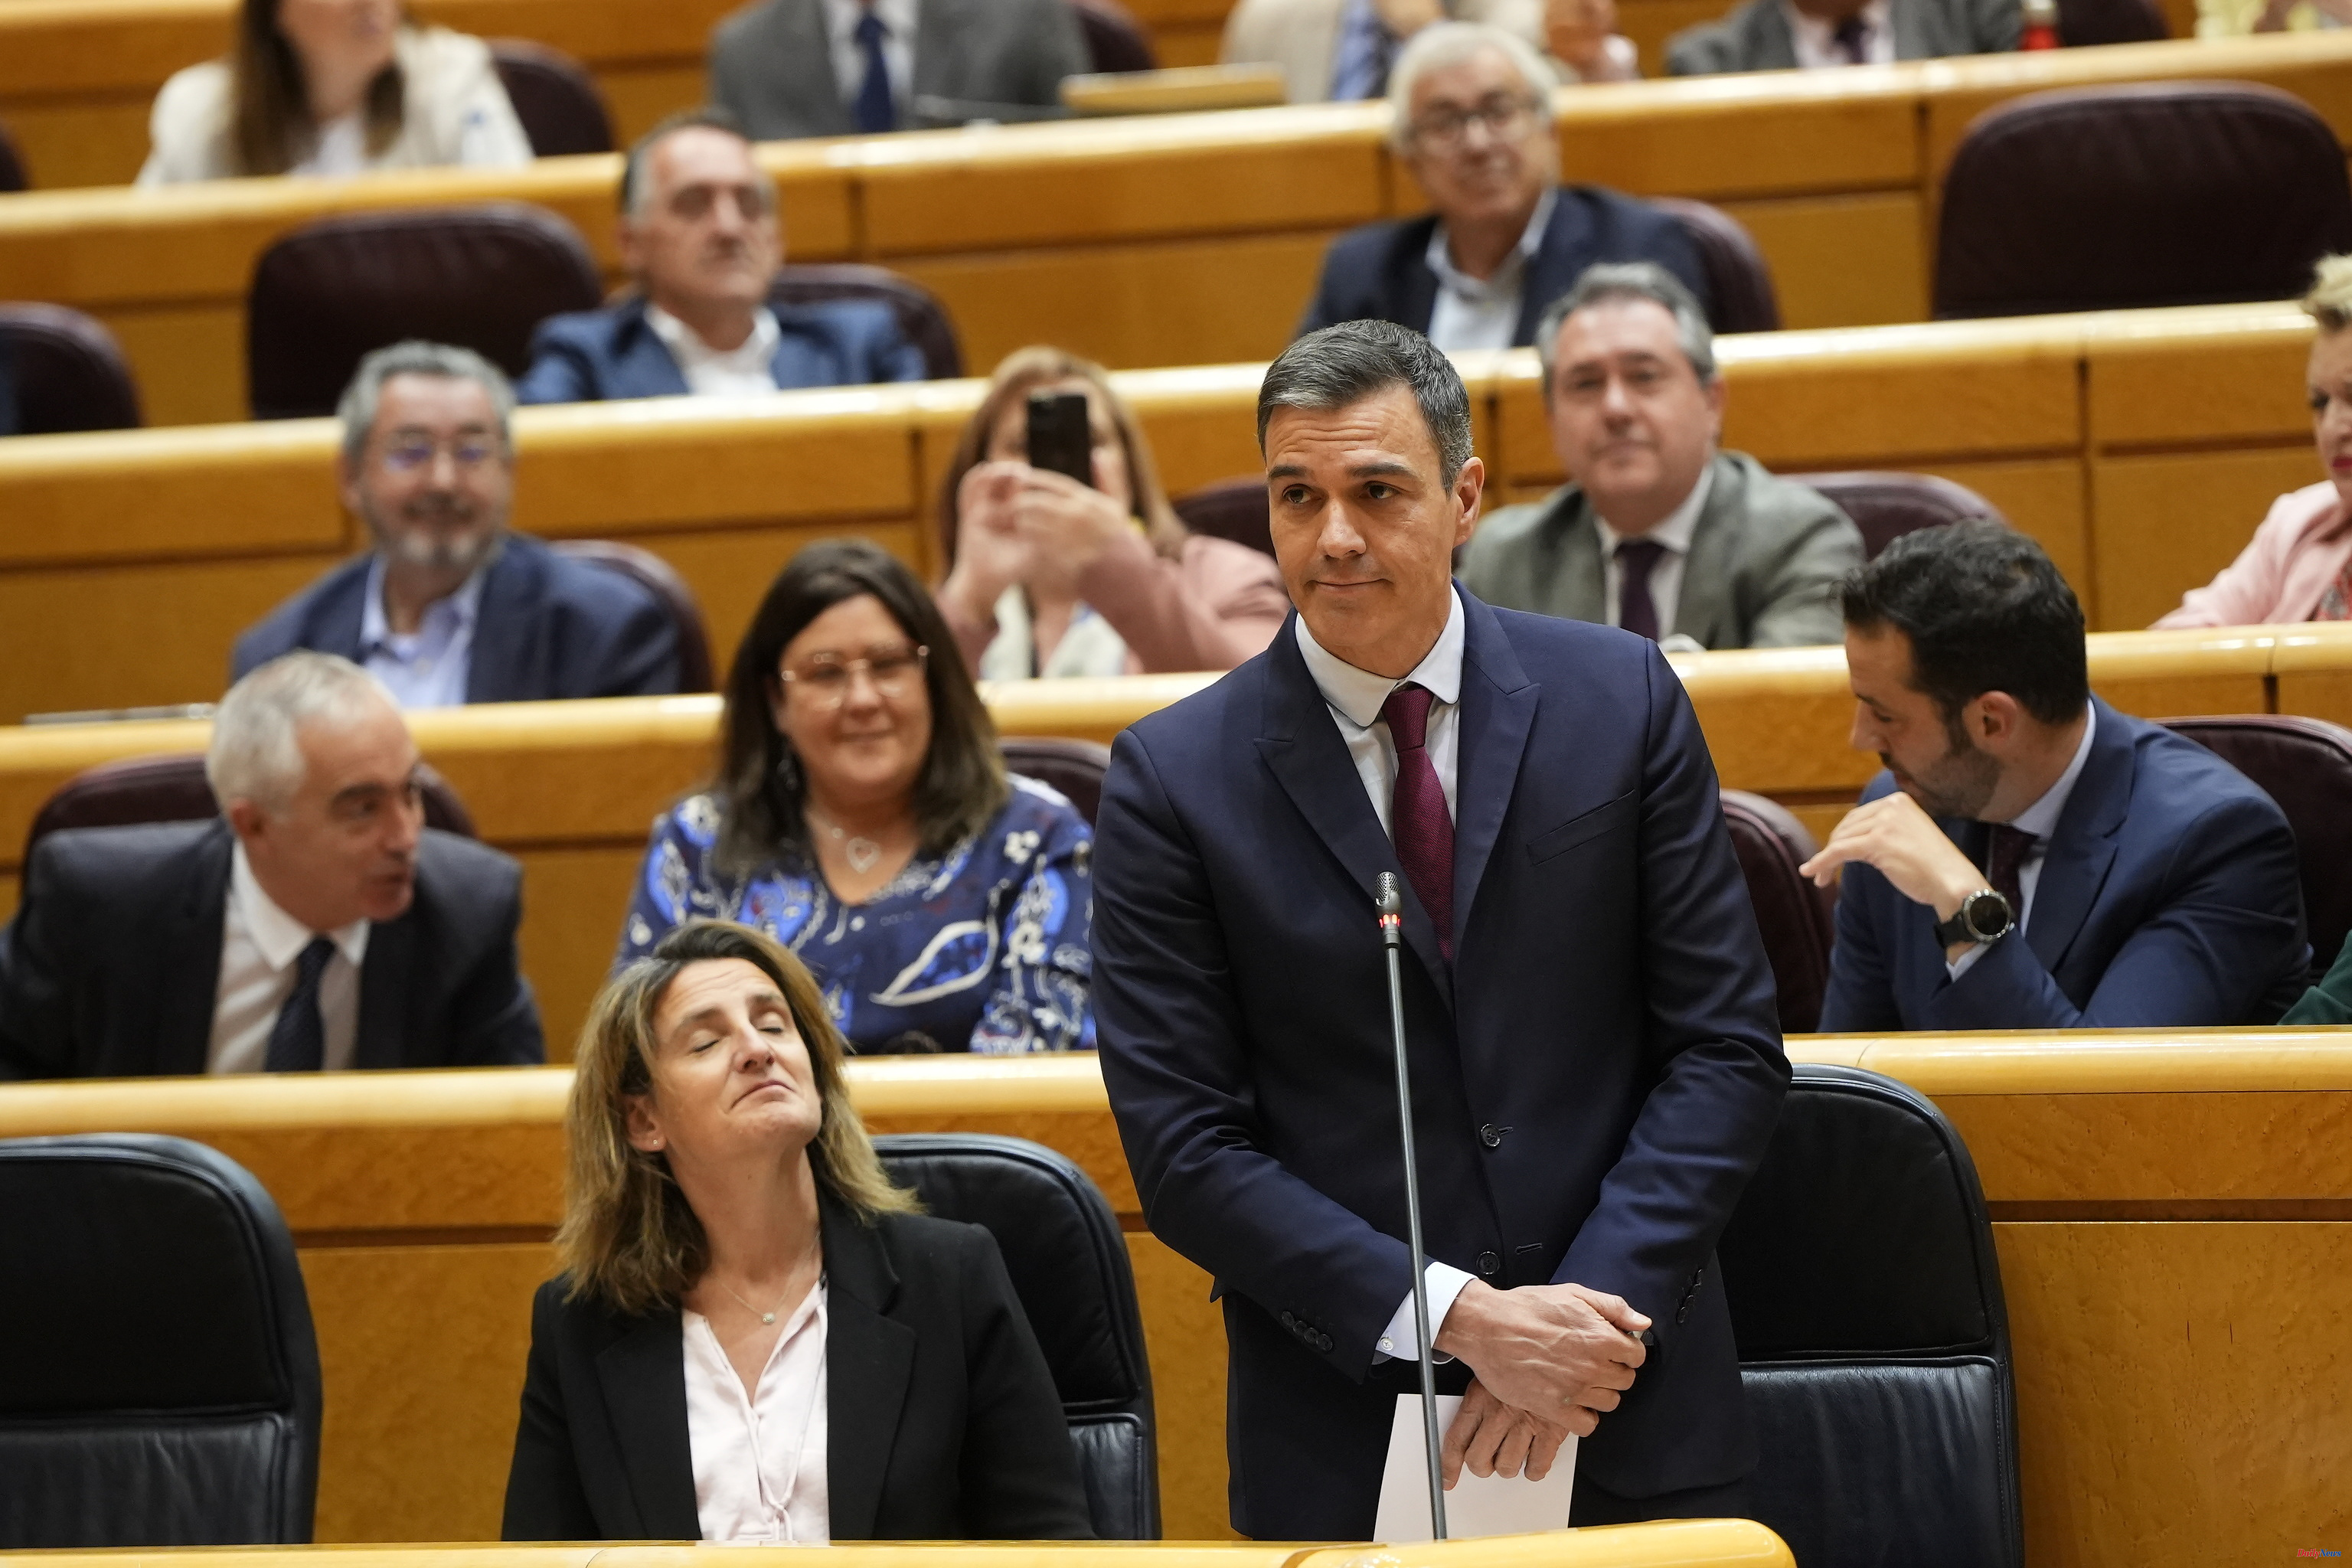 politics The Senate disapproves of Pedro Sánchez's "opaque negotiations" with those who "want to blow up the State"